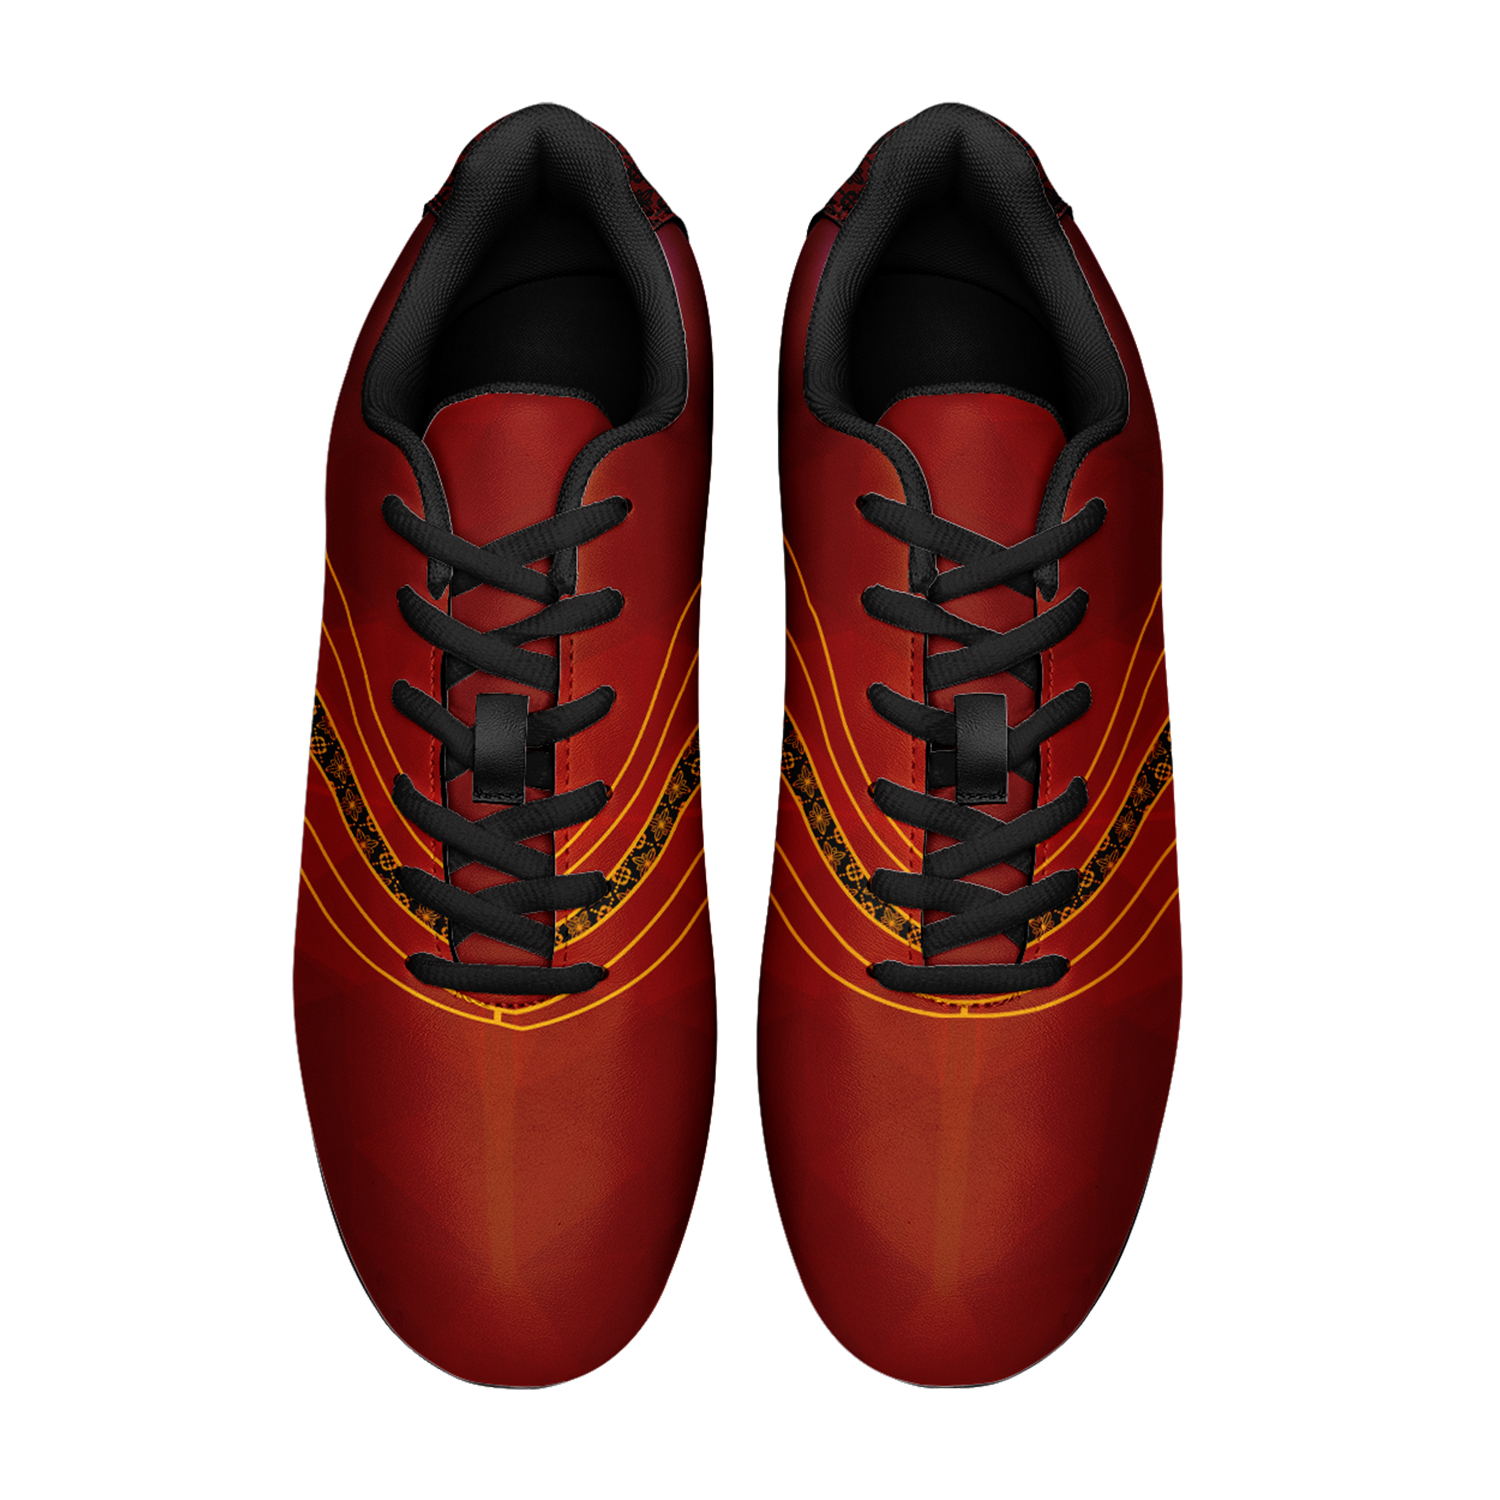 Custom Spain Team Outdoor Firm Ground Soccer Cleats Print On Demand Football Shoes